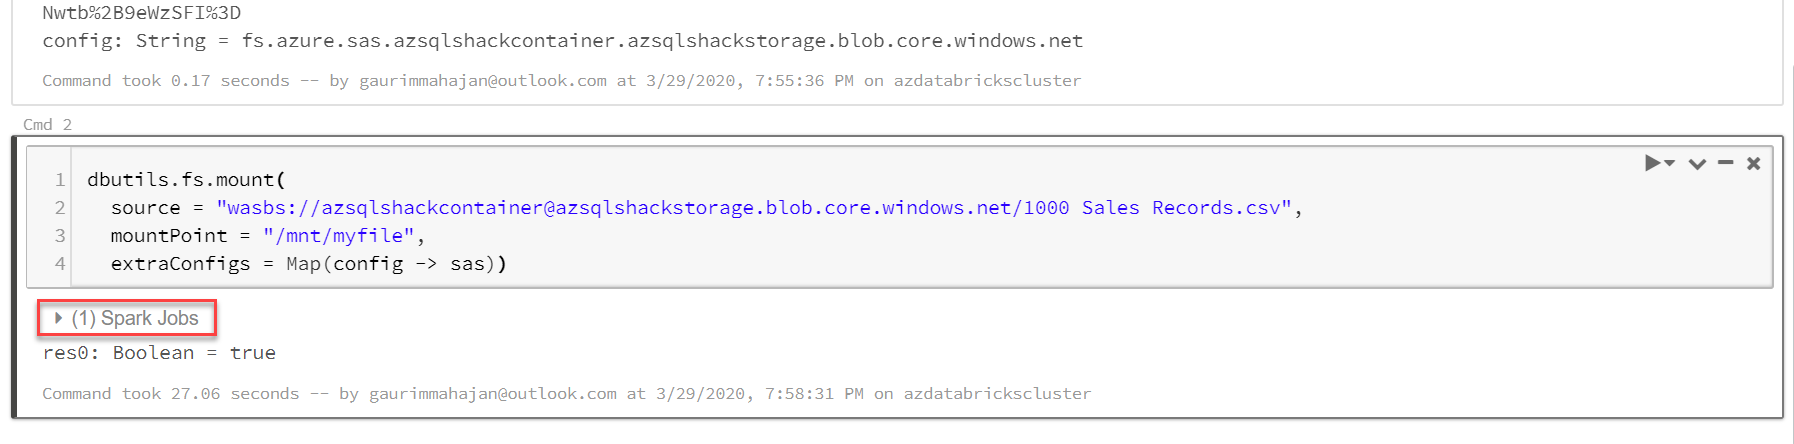 Mounting the Blob Storage container in Databricks 2/2